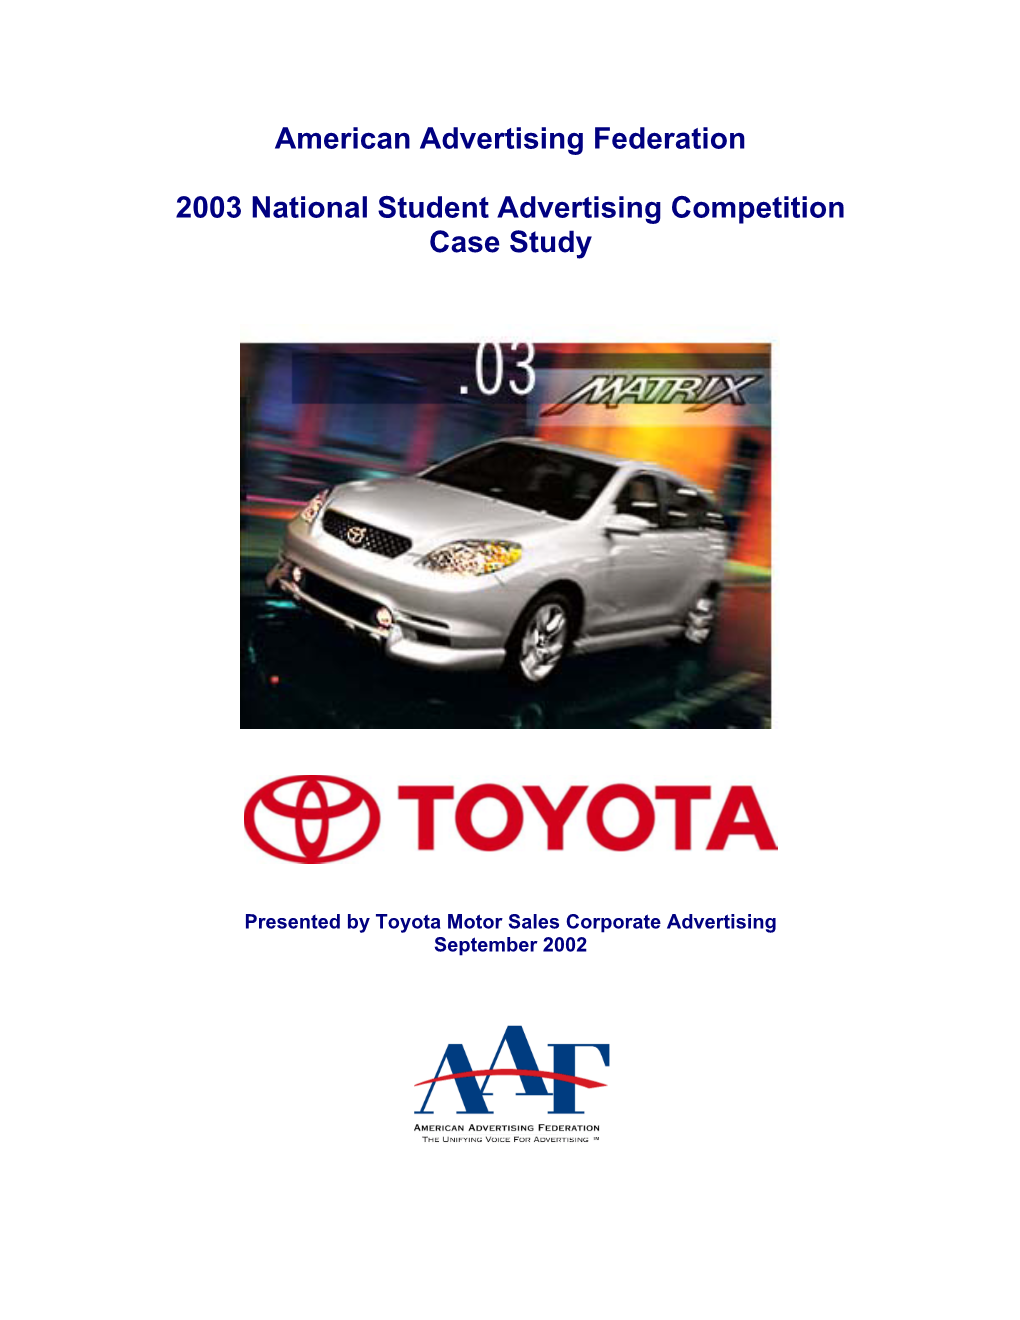 American Advertising Federation 2003 National Student